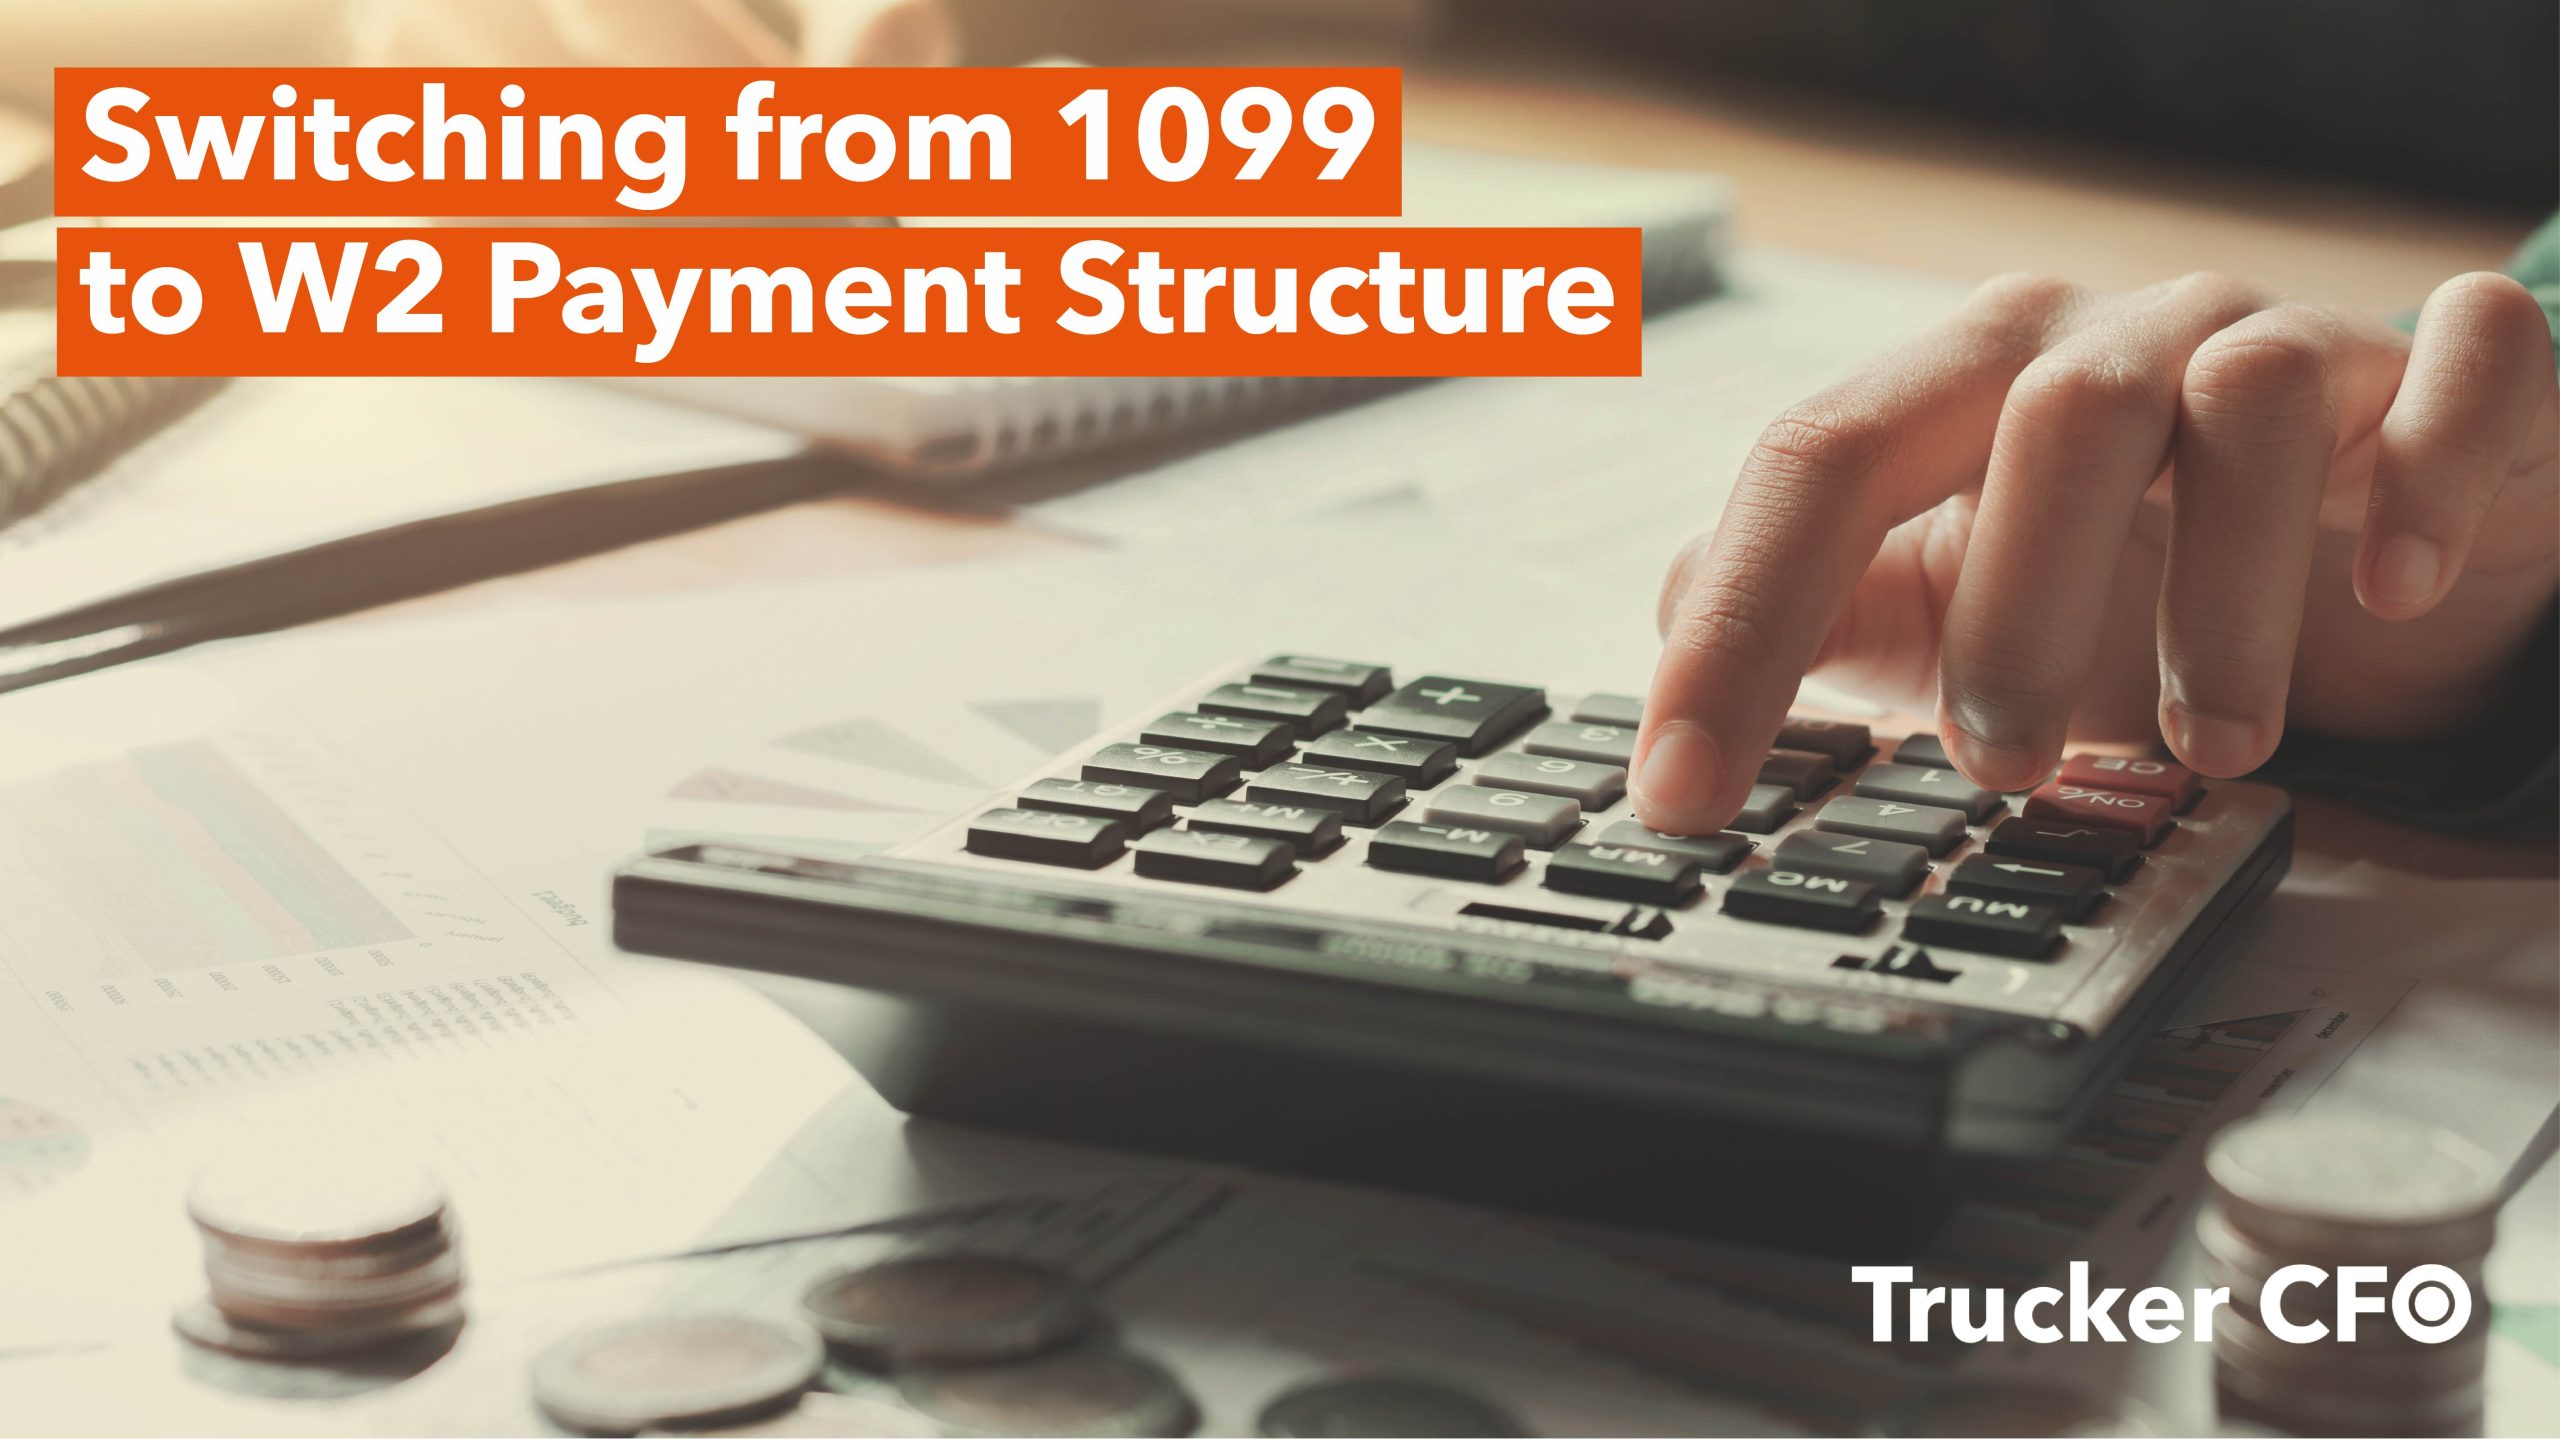 Switching from 1099 to W2 Payment Structure